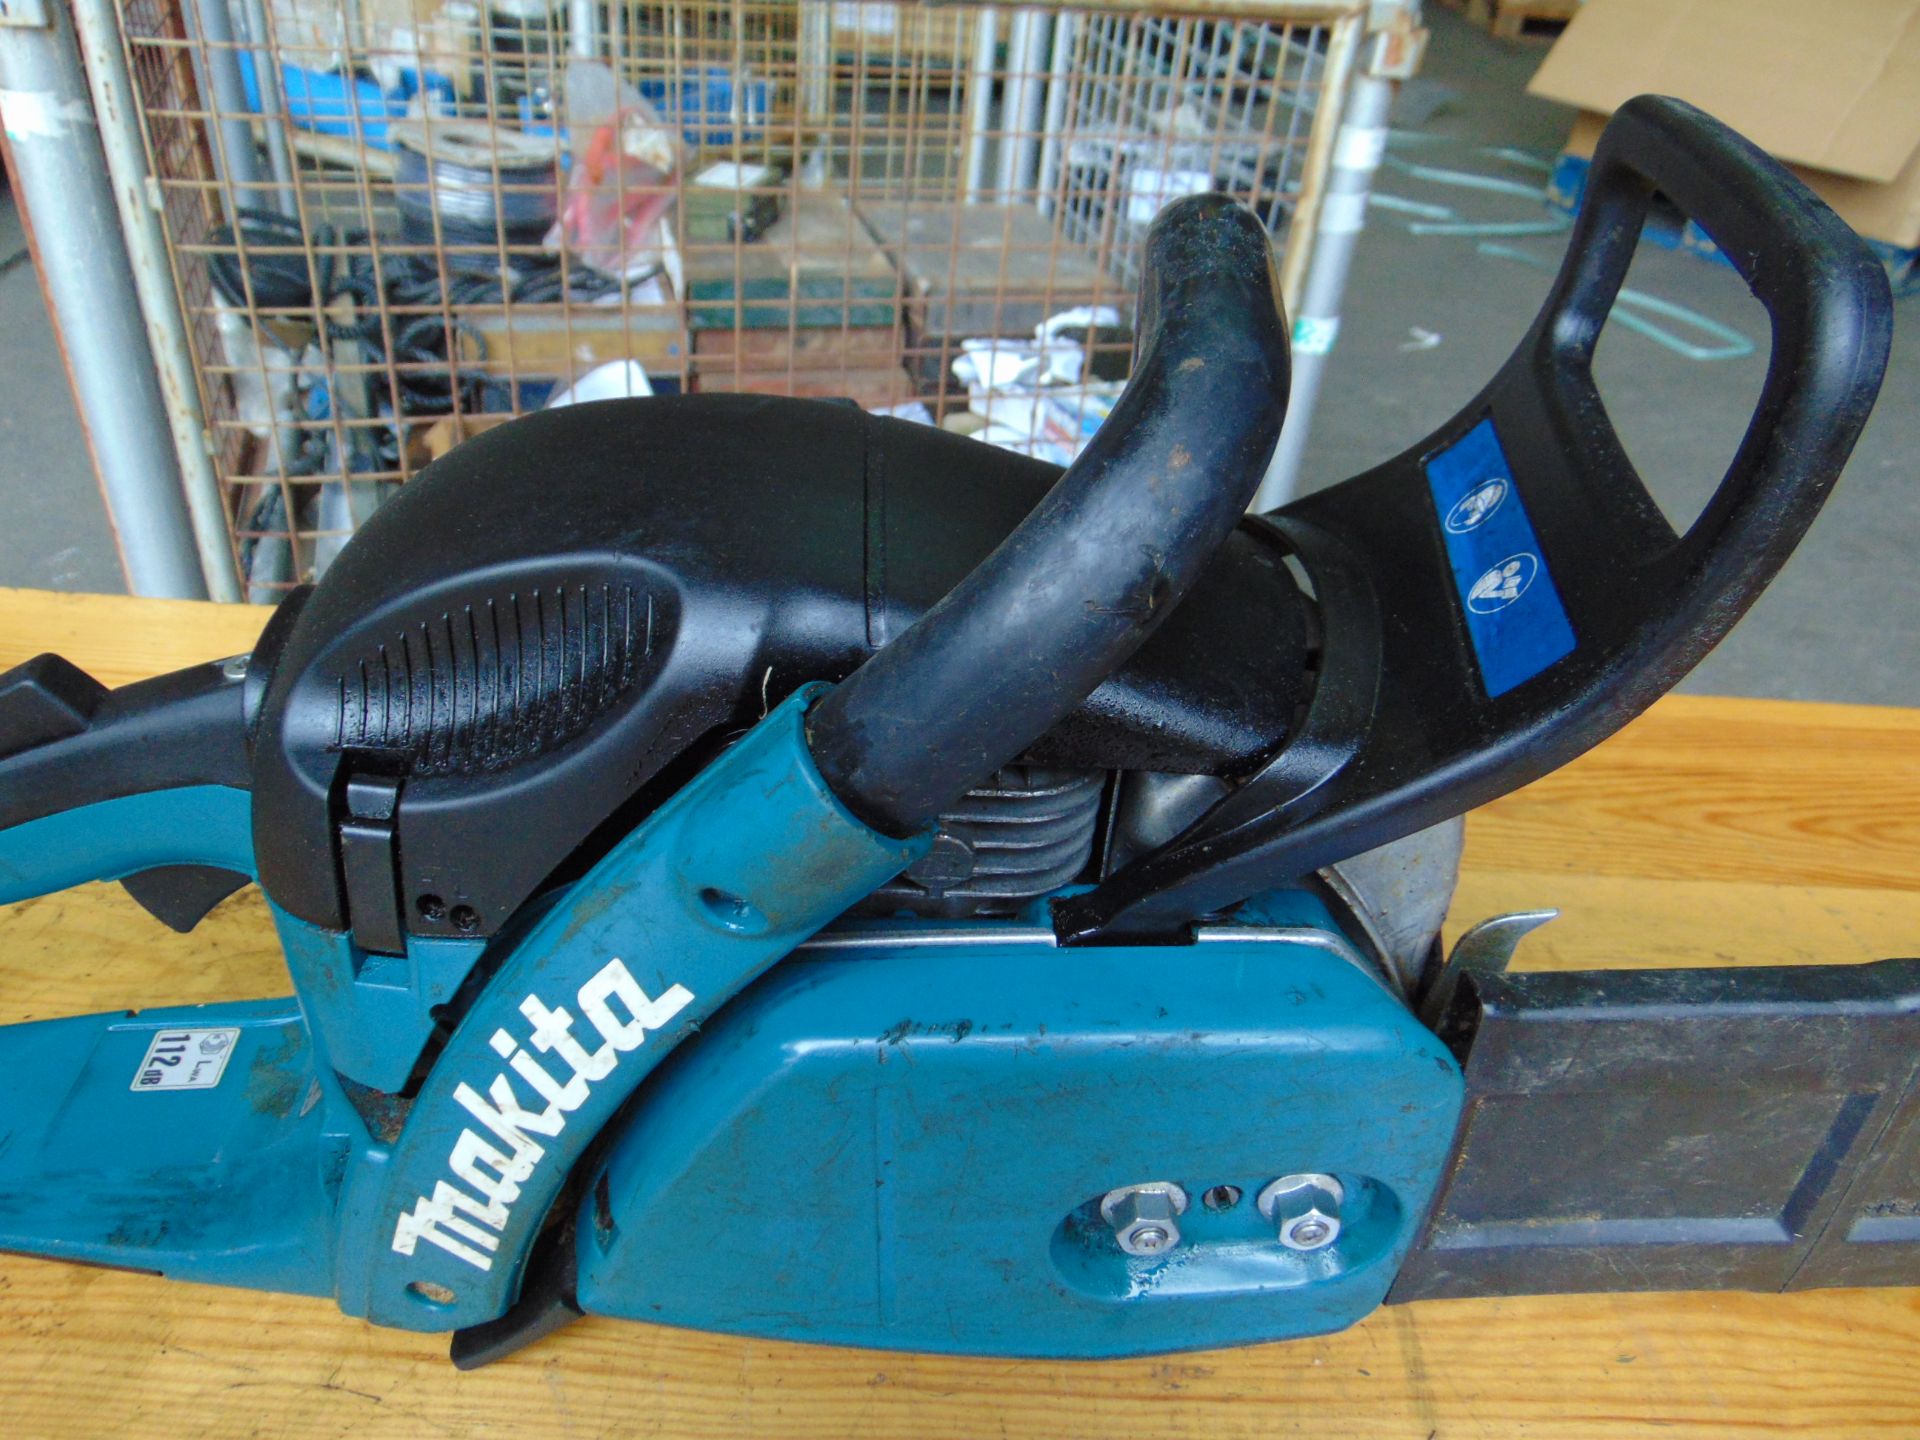 Makita DCS5030 Chain saw c/w chain and guard 50cc from UK MoD - Image 2 of 6